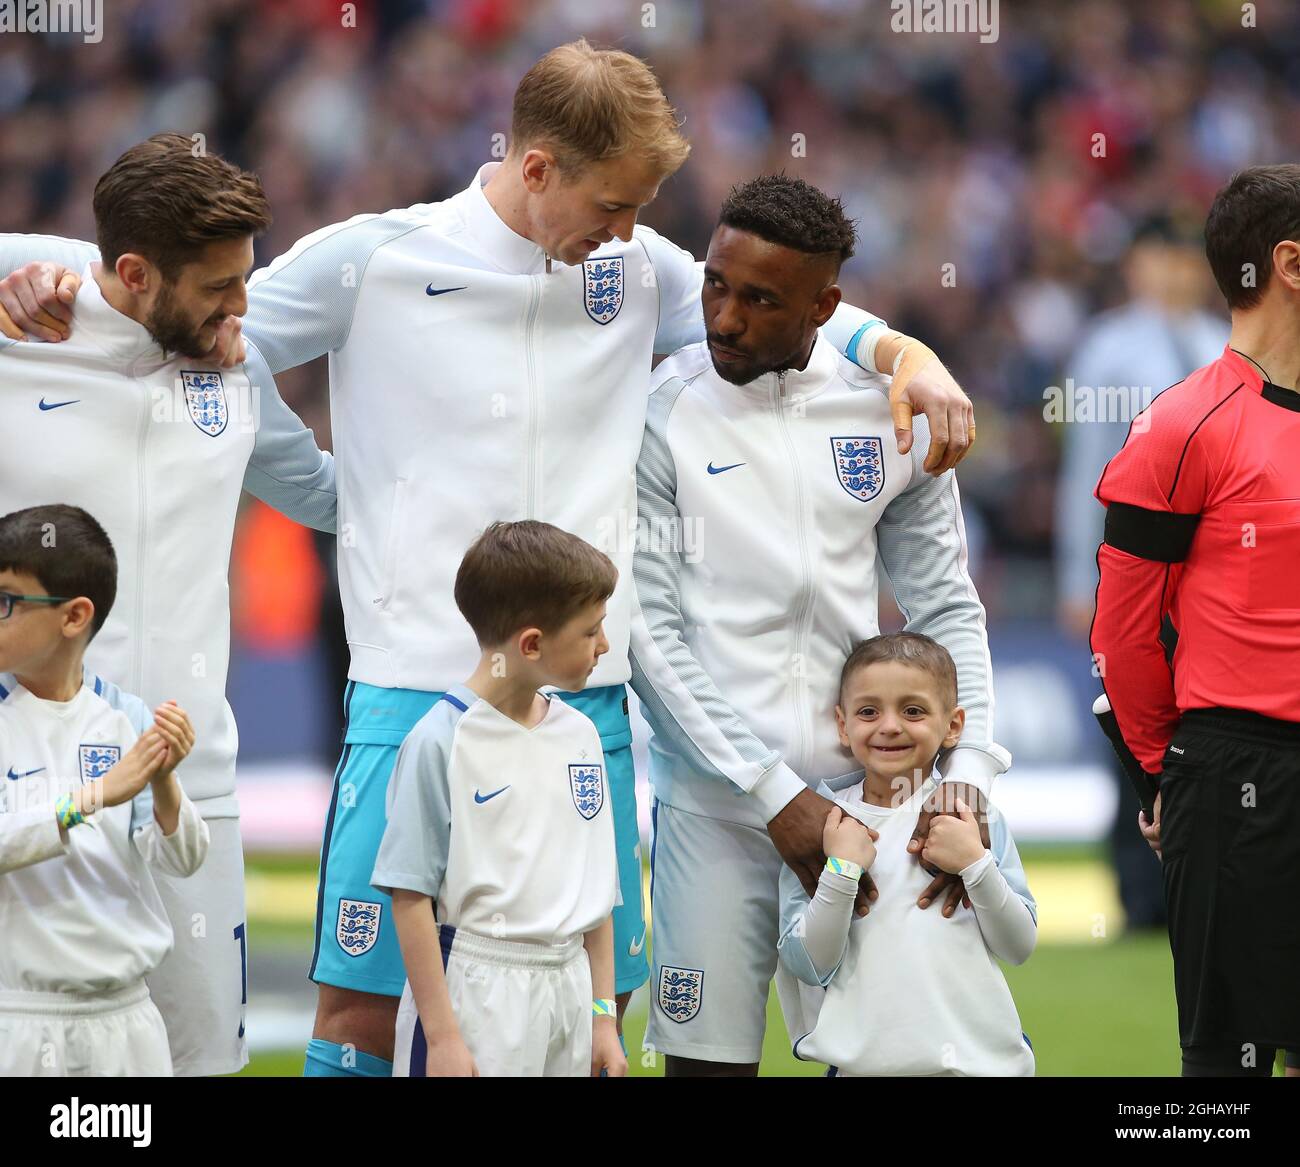 England's Lithuania's during the World Cup Qualifying match at Wembley Stadium, London. Picture date: March 26th, 2017. Pic credit should read: David Klein/SportimageJermain Defoe with terminally ill five-year-old mascot Bradley Lowery before the World Cup Qualifying match at Wembley Stadium, London. Picture date: March 26th, 2017. Pic credit should read: David Klein/Sportimage via PA Images Stock Photo